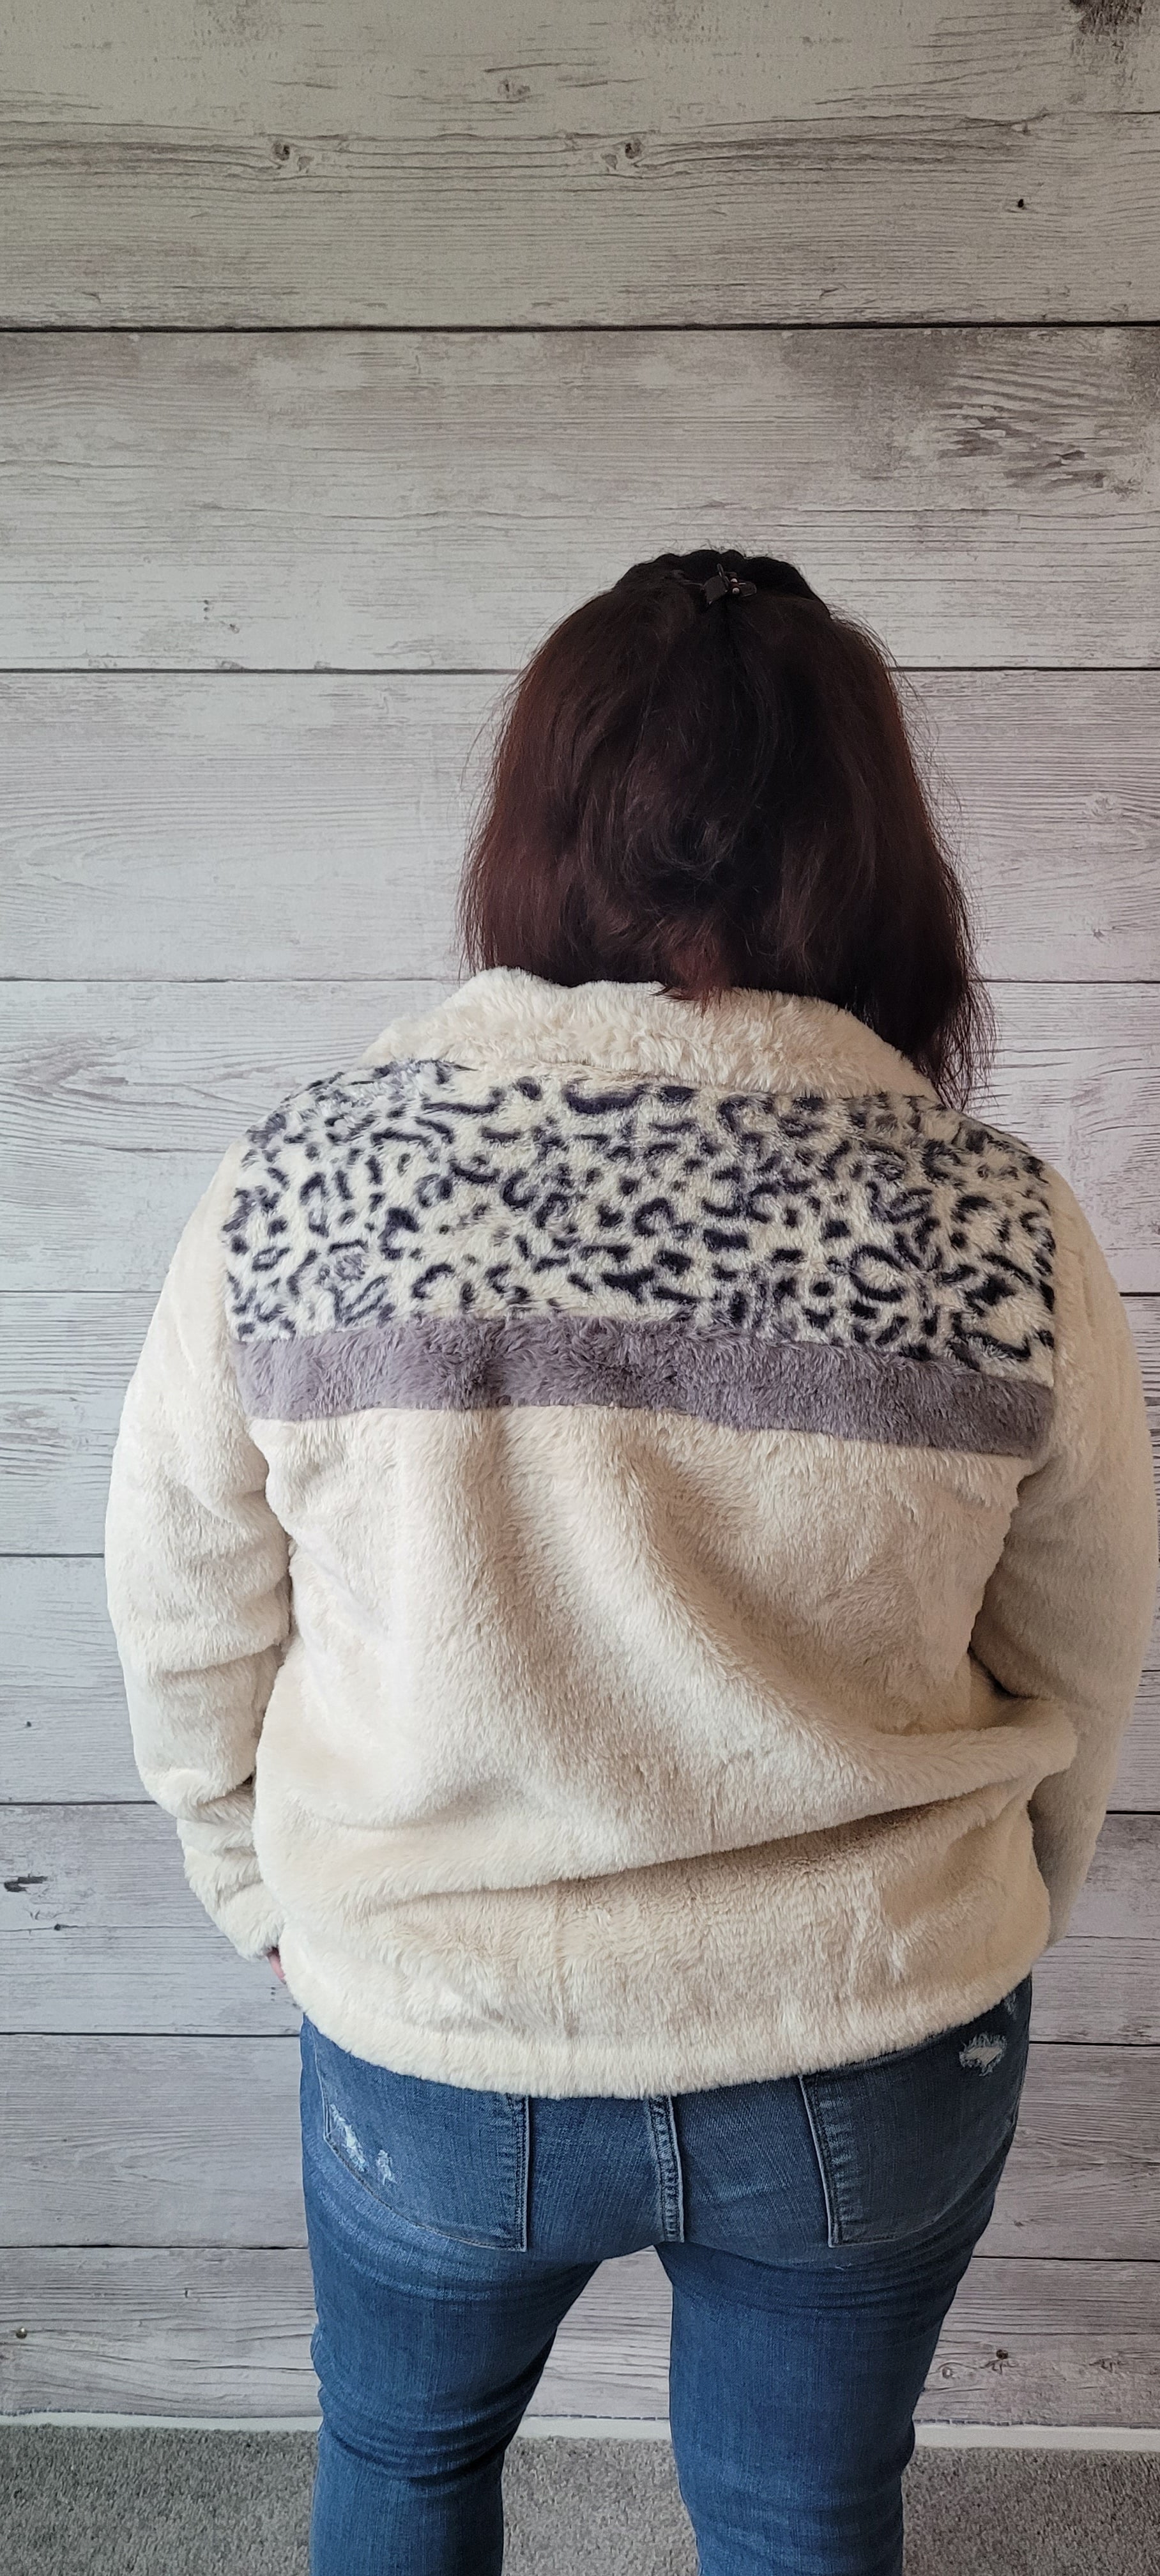 The "Raegan Ivory Faux Fur Jacket" is a luxurious treat for your wardrobe! Cozy up in this zip-front fur beauty featuring contrast leopard print for a wild touch. With its side pockets and comfy lining, you'll be ready for whatever wild night awaits you! Fur sure! Sizes small through large.